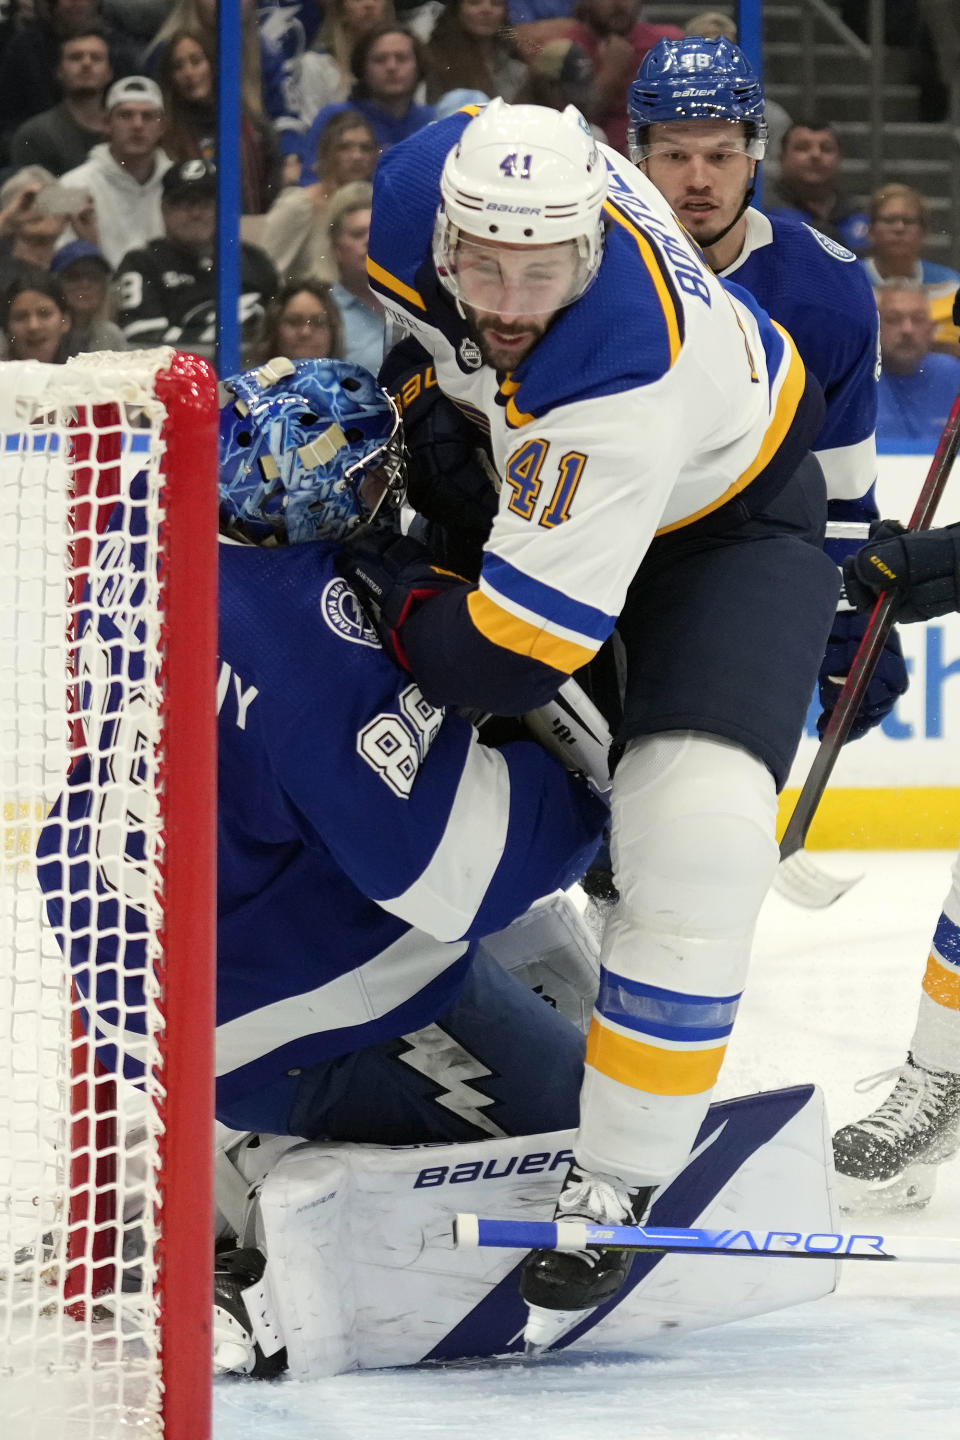 St. Louis Blues defenseman Robert Bortuzzo (41) crashes into Tampa Bay Lightning goaltender Andrei Vasilevskiy (88) during the first period of an NHL hockey game Friday, Nov. 25, 2022, in Tampa, Fla. Bortuzzo was penalized on the play. (AP Photo/Chris O'Meara)